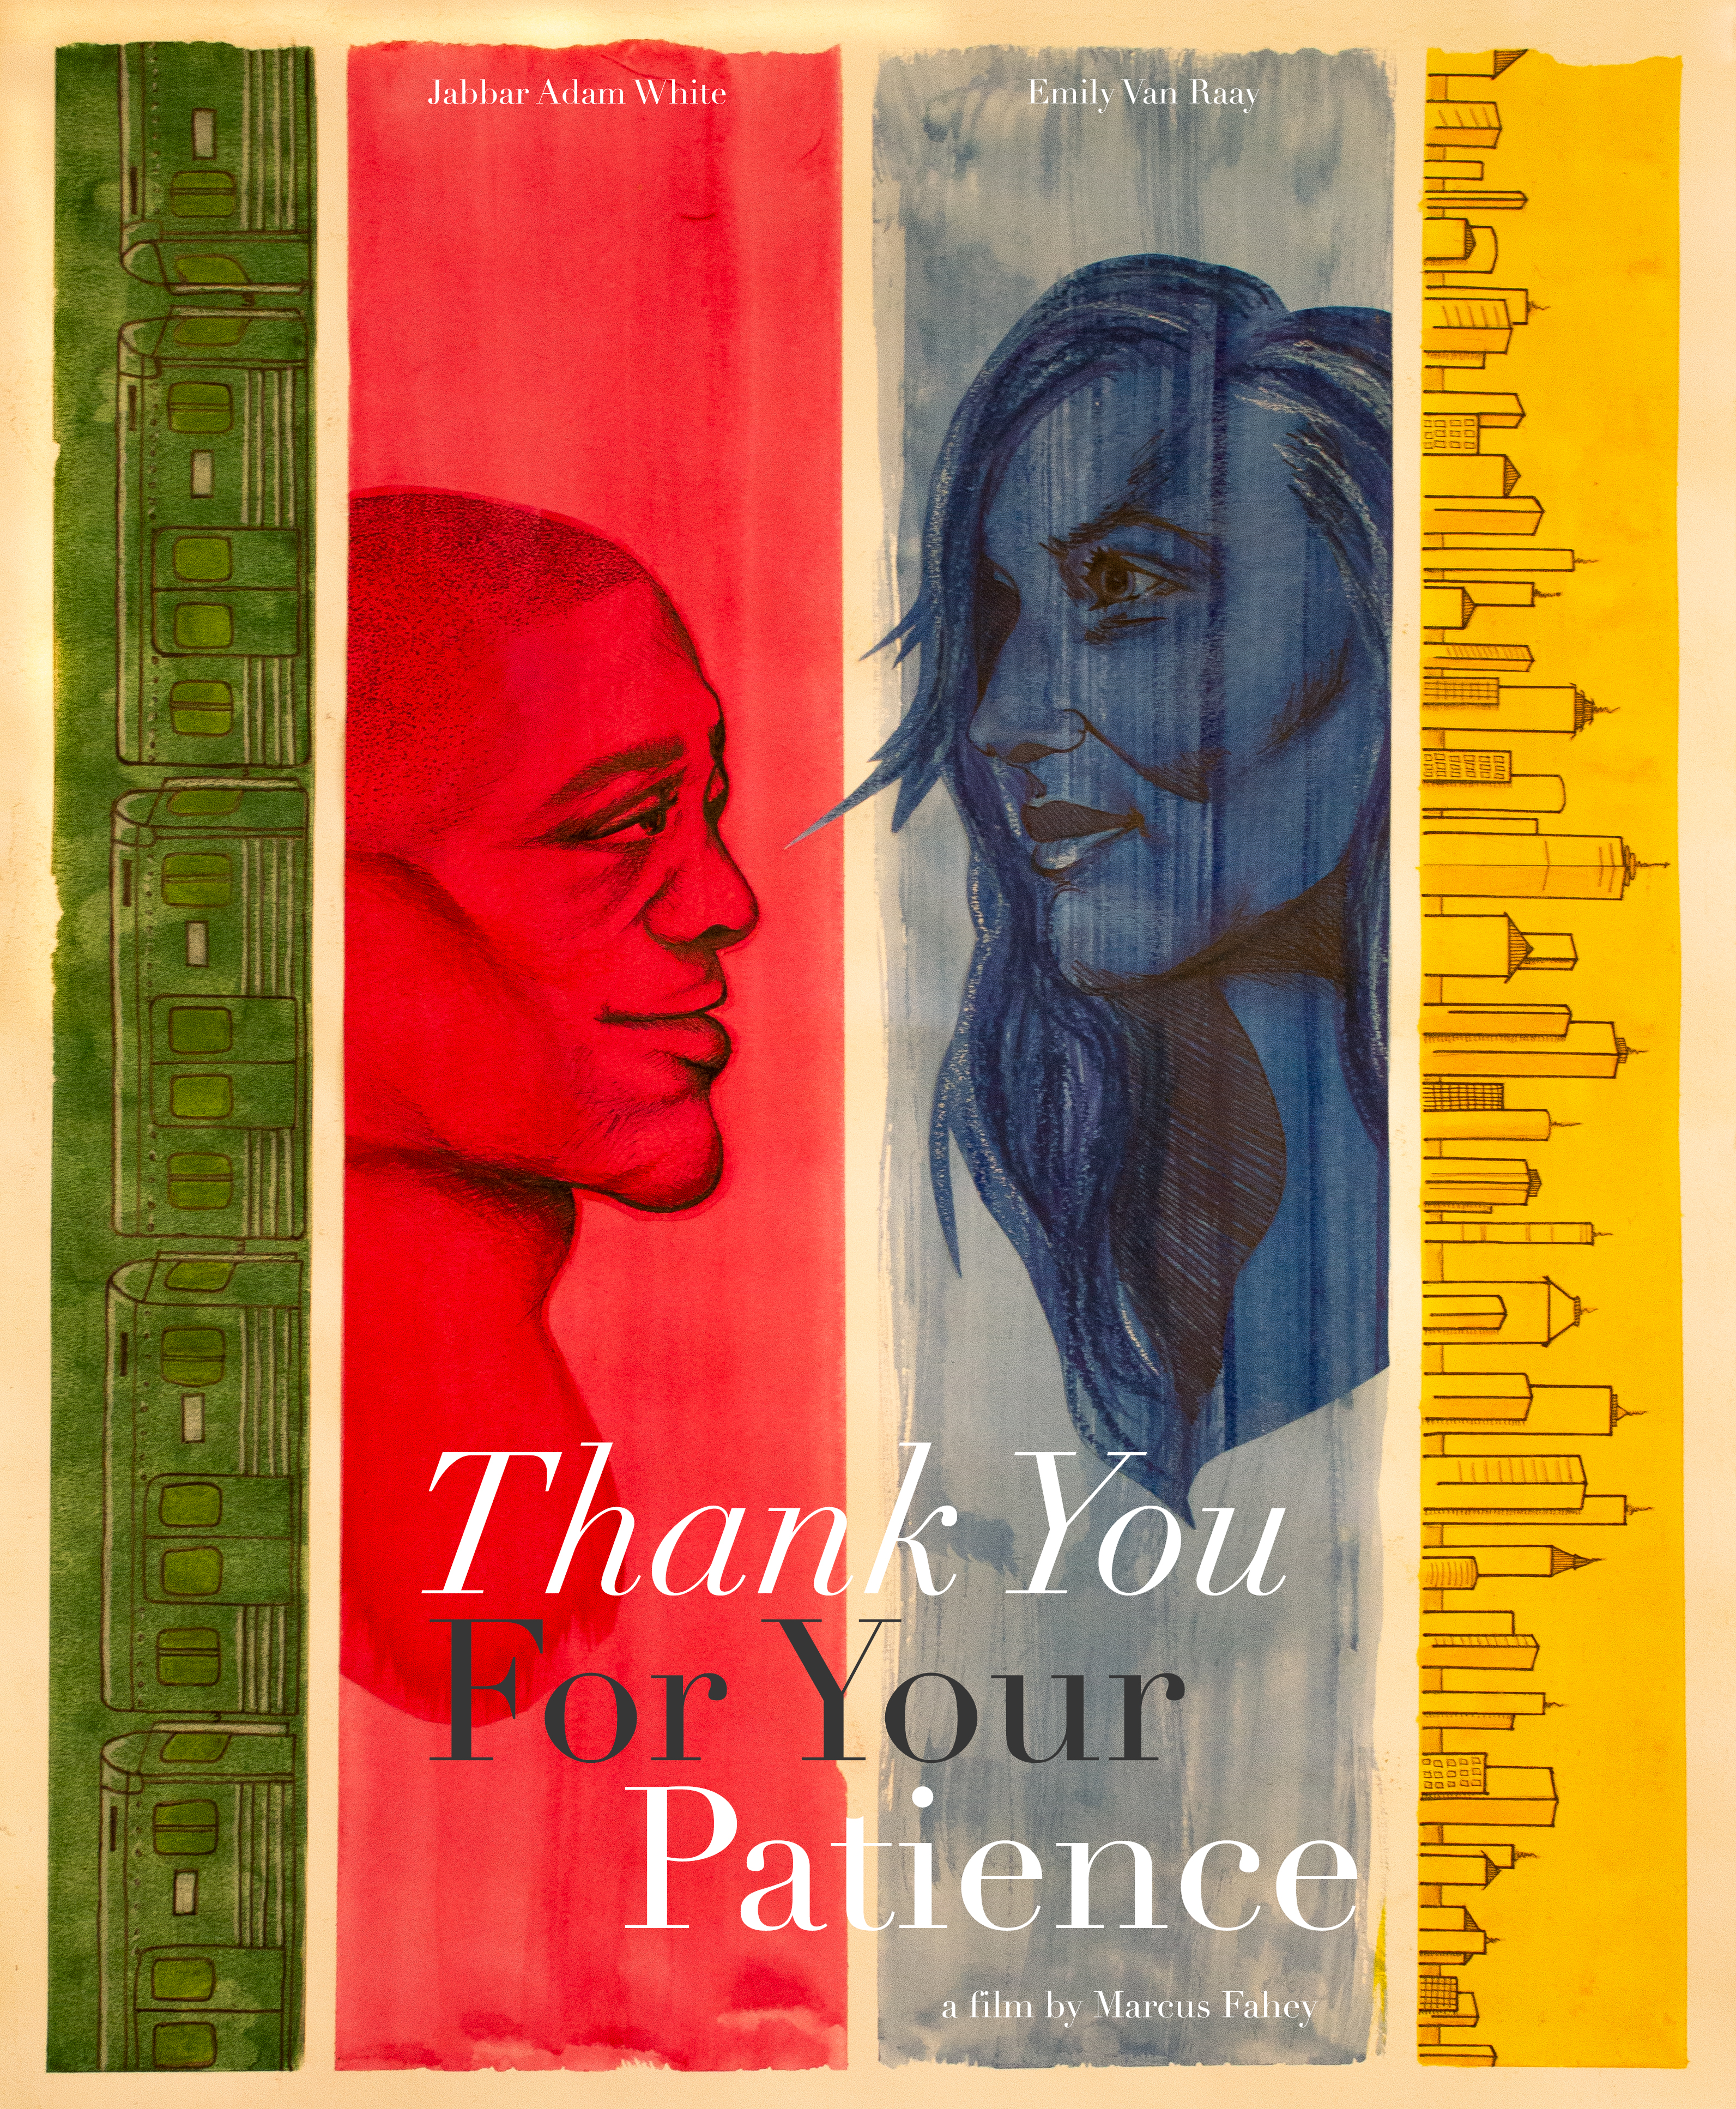 Thank You for Your Patience (2021)